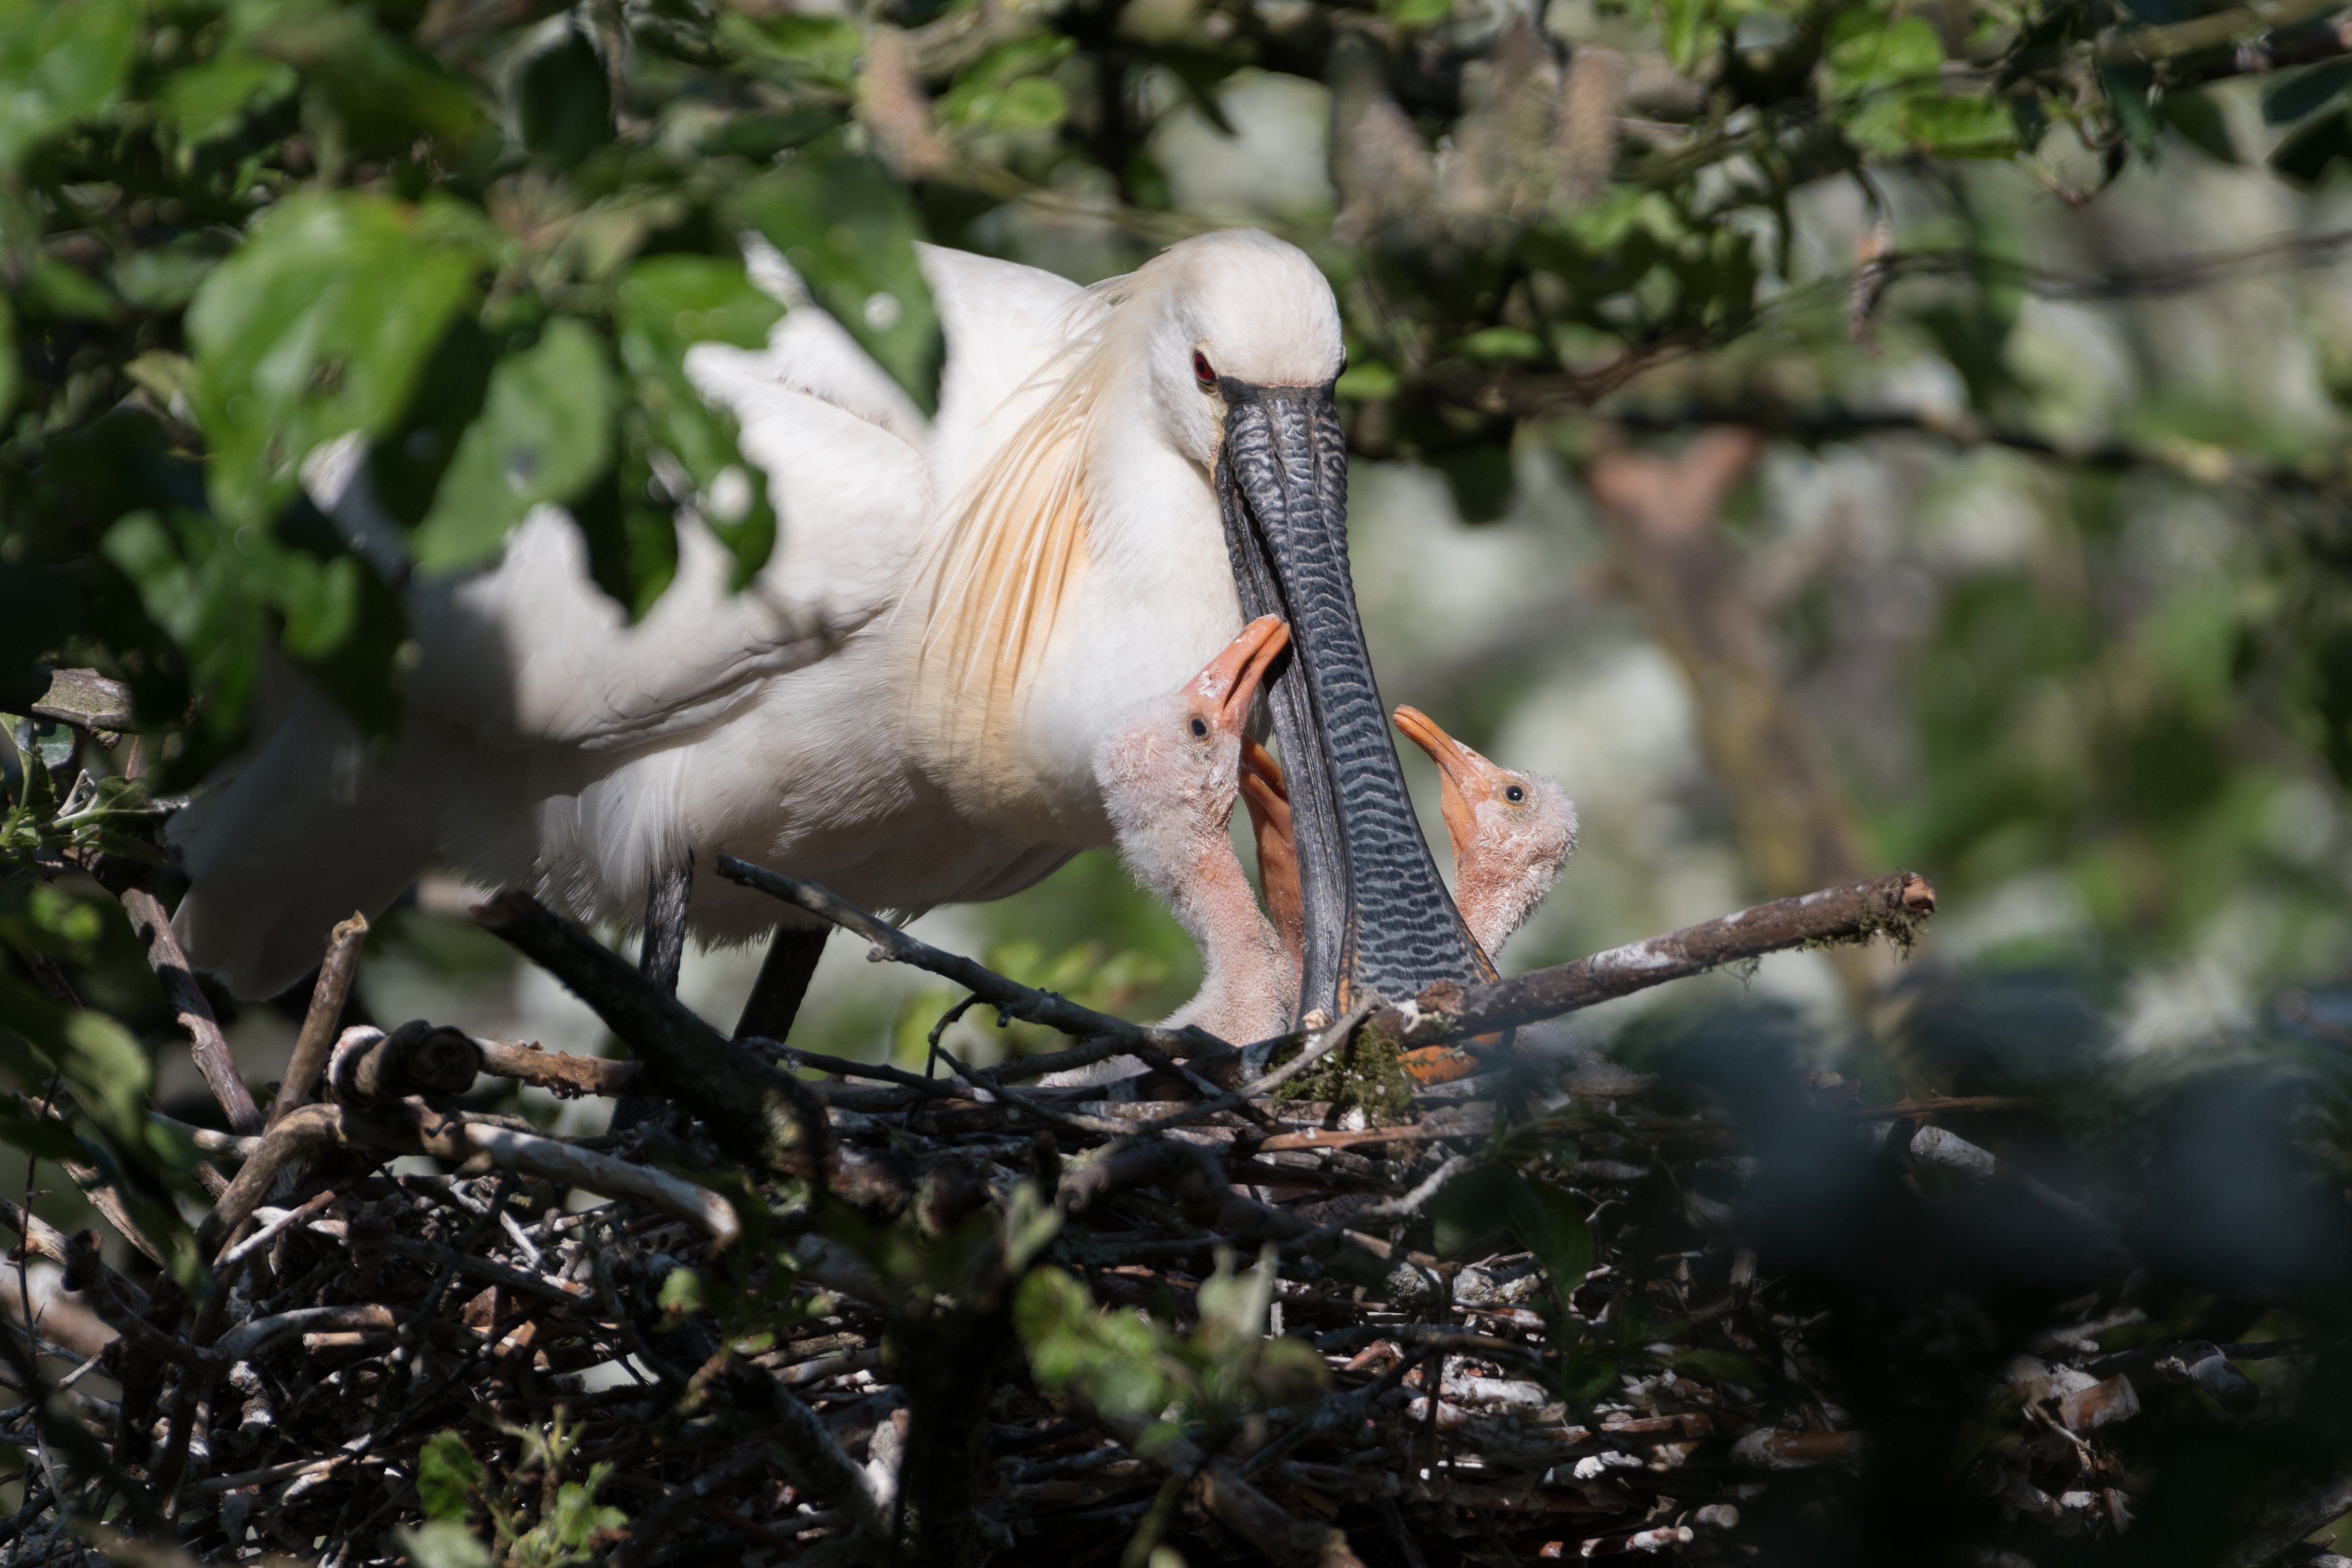 Eurasian spoonbills are one of many species that travel along the east Atlantic flyway